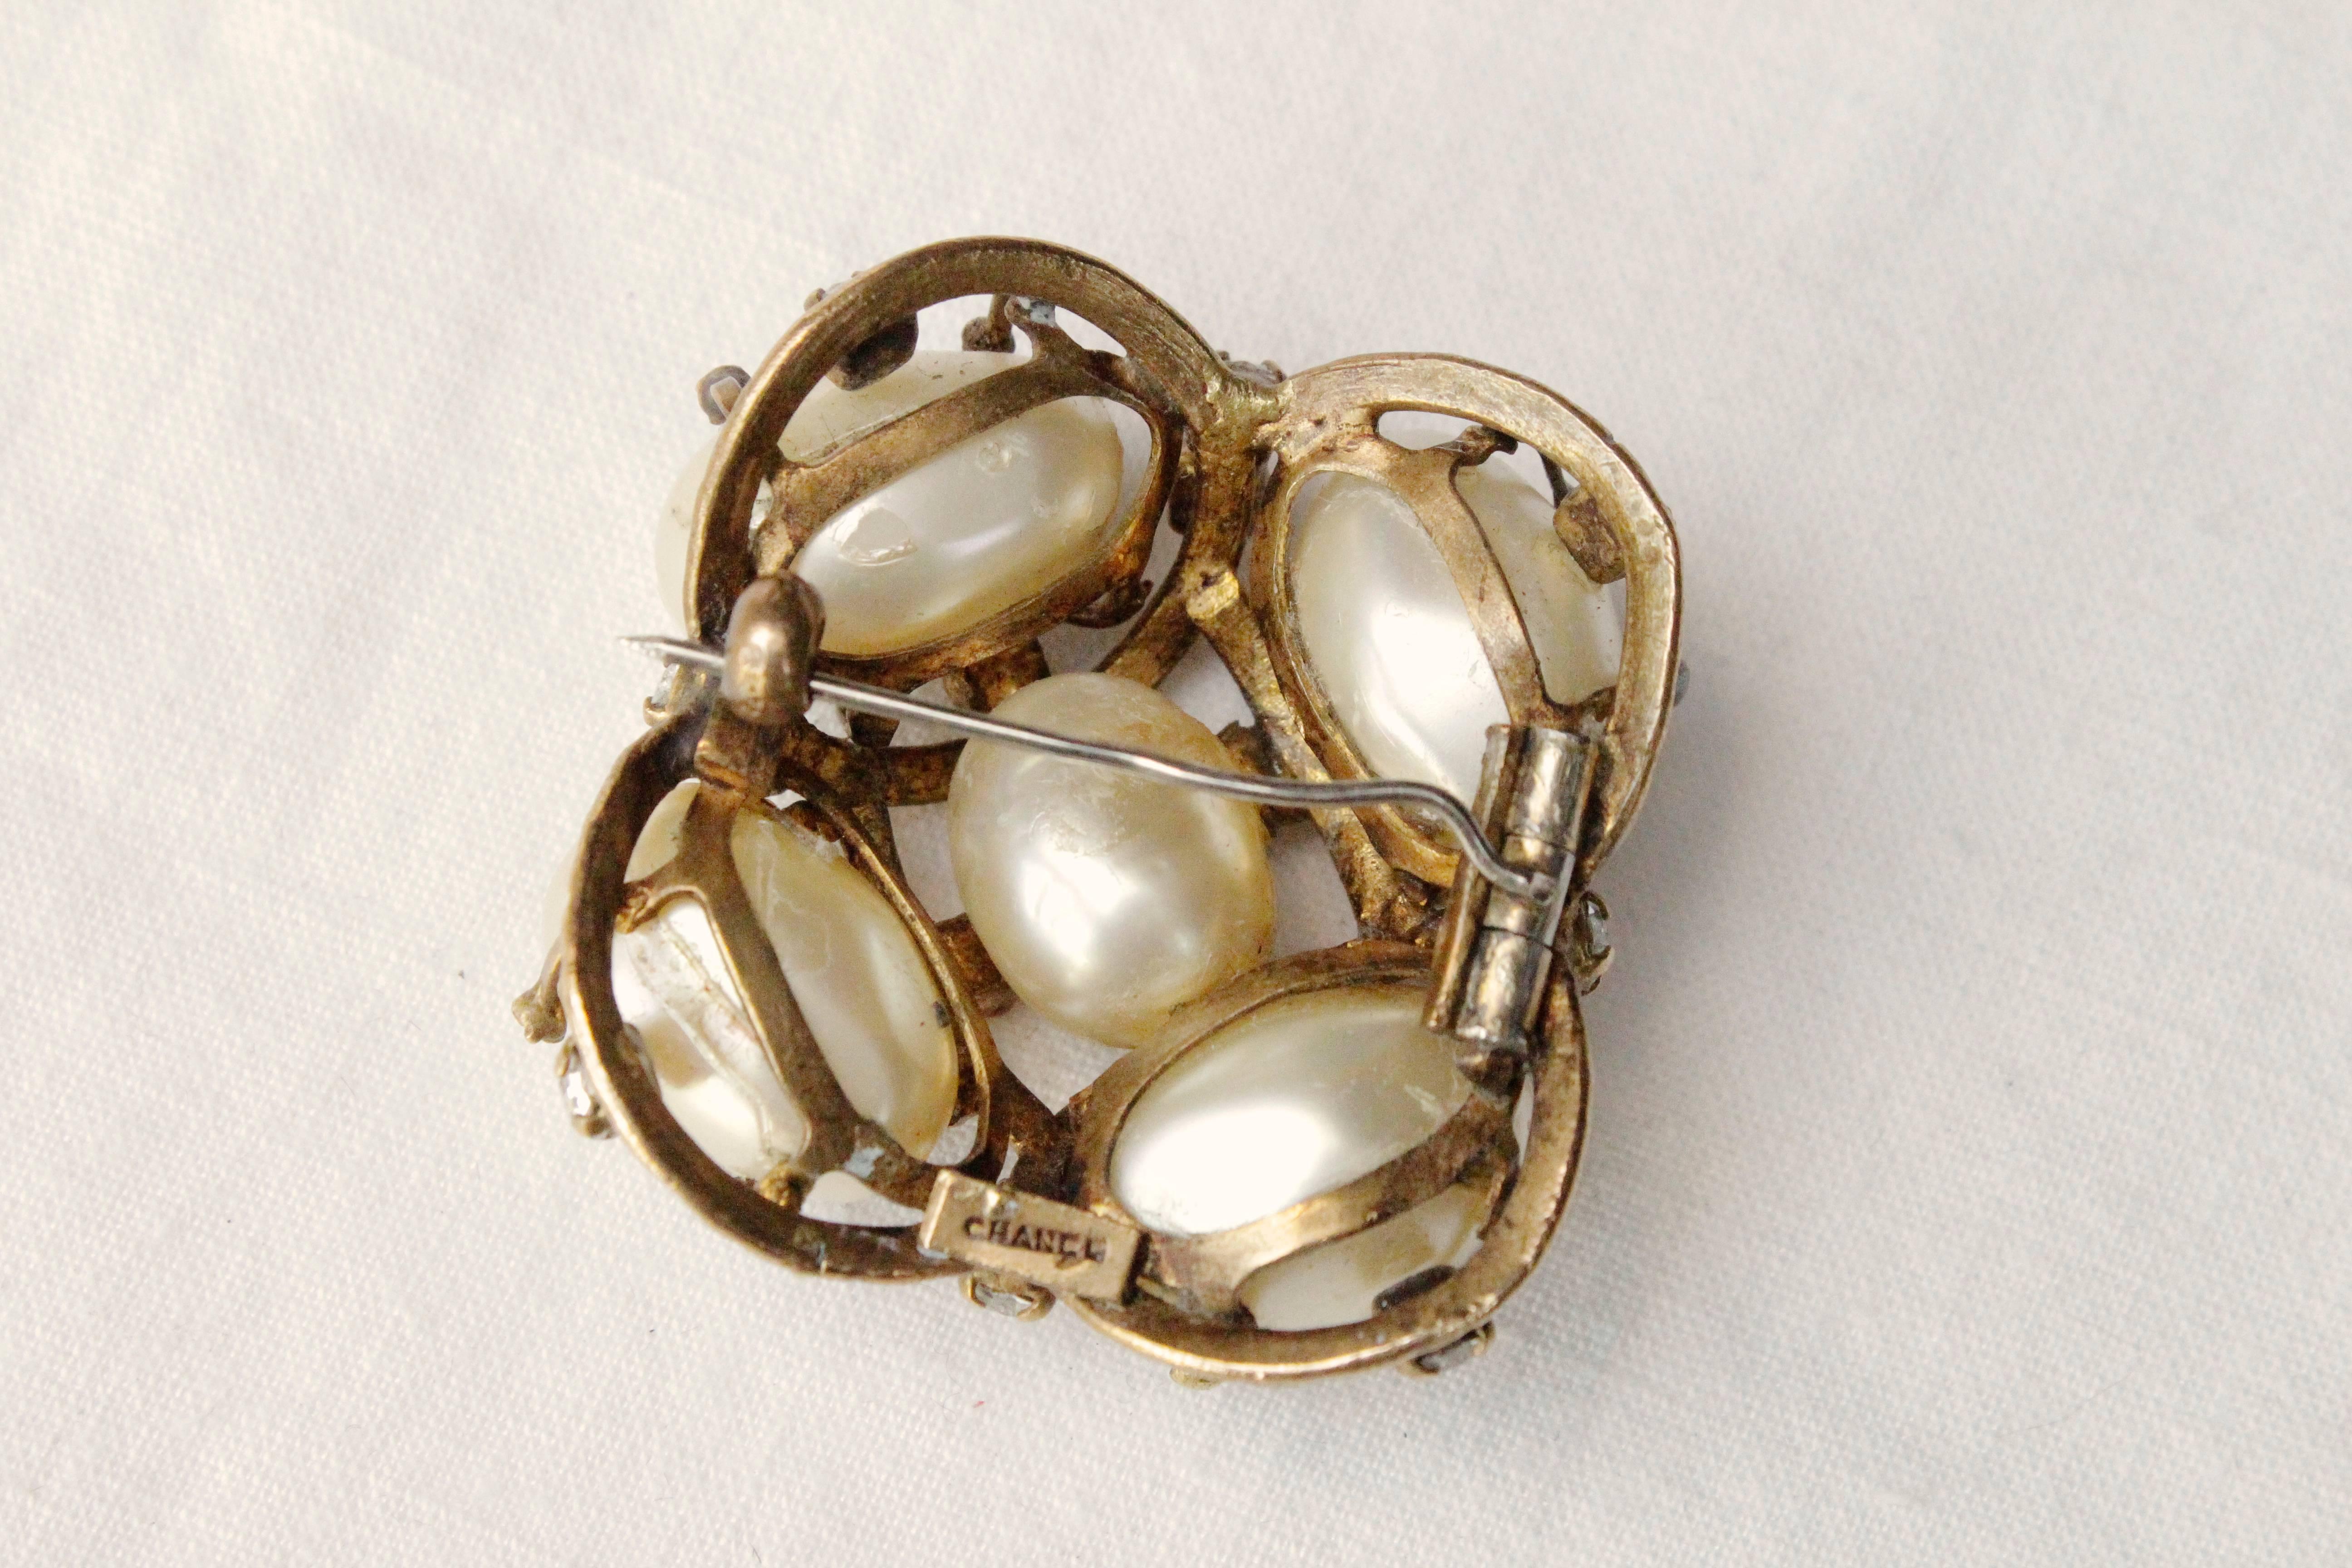 1955-1965s Chanel vintage brooch made of pearly beads and rhinestones  1